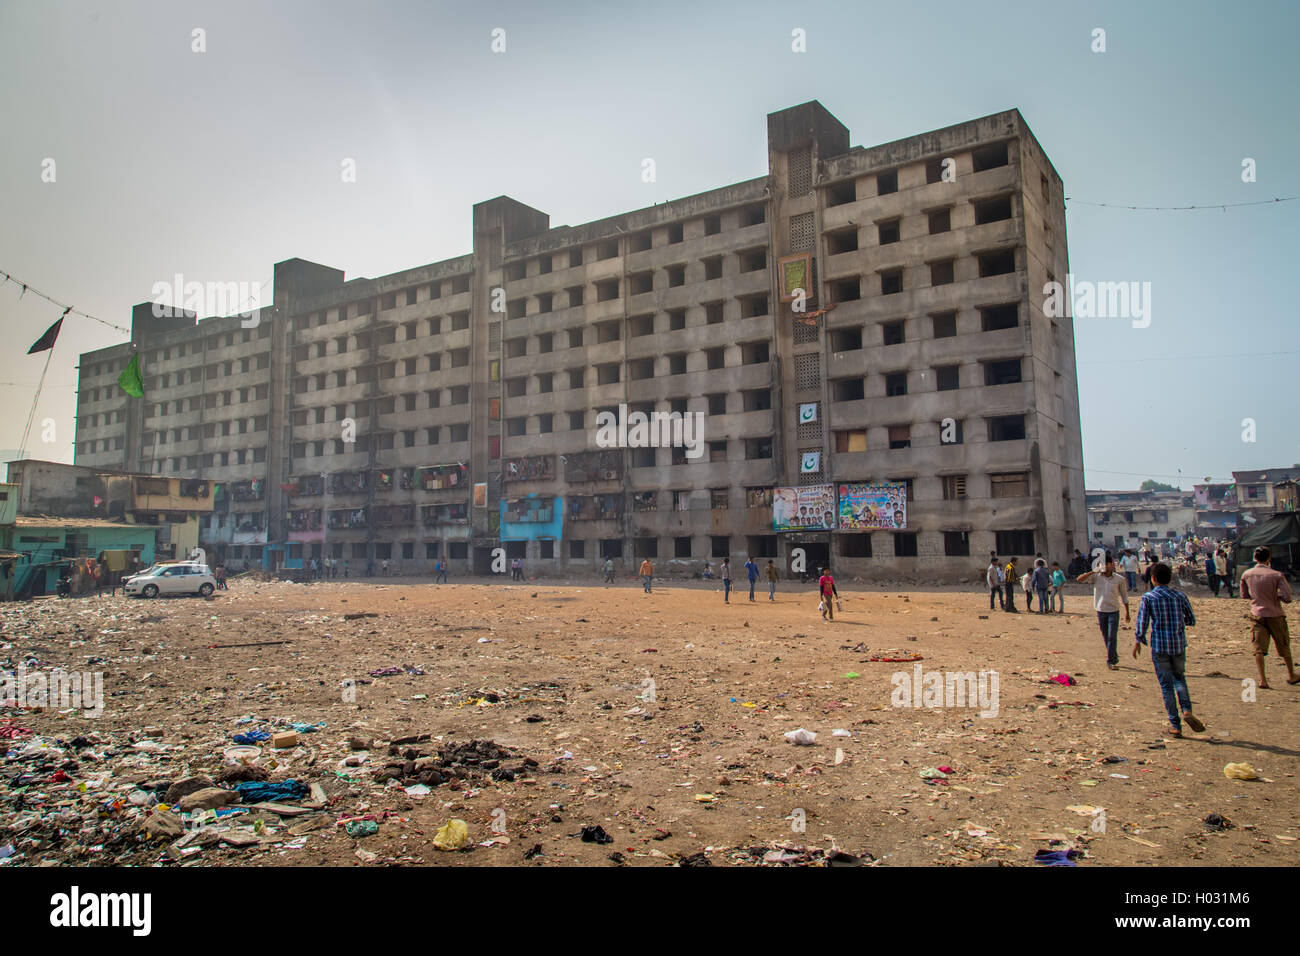 MUMBAI, INDIA - 12 JANUARY 2015: Unfinished empty apartment block and dirty field with people in Dharavi slum. Dharavi is one of Stock Photo